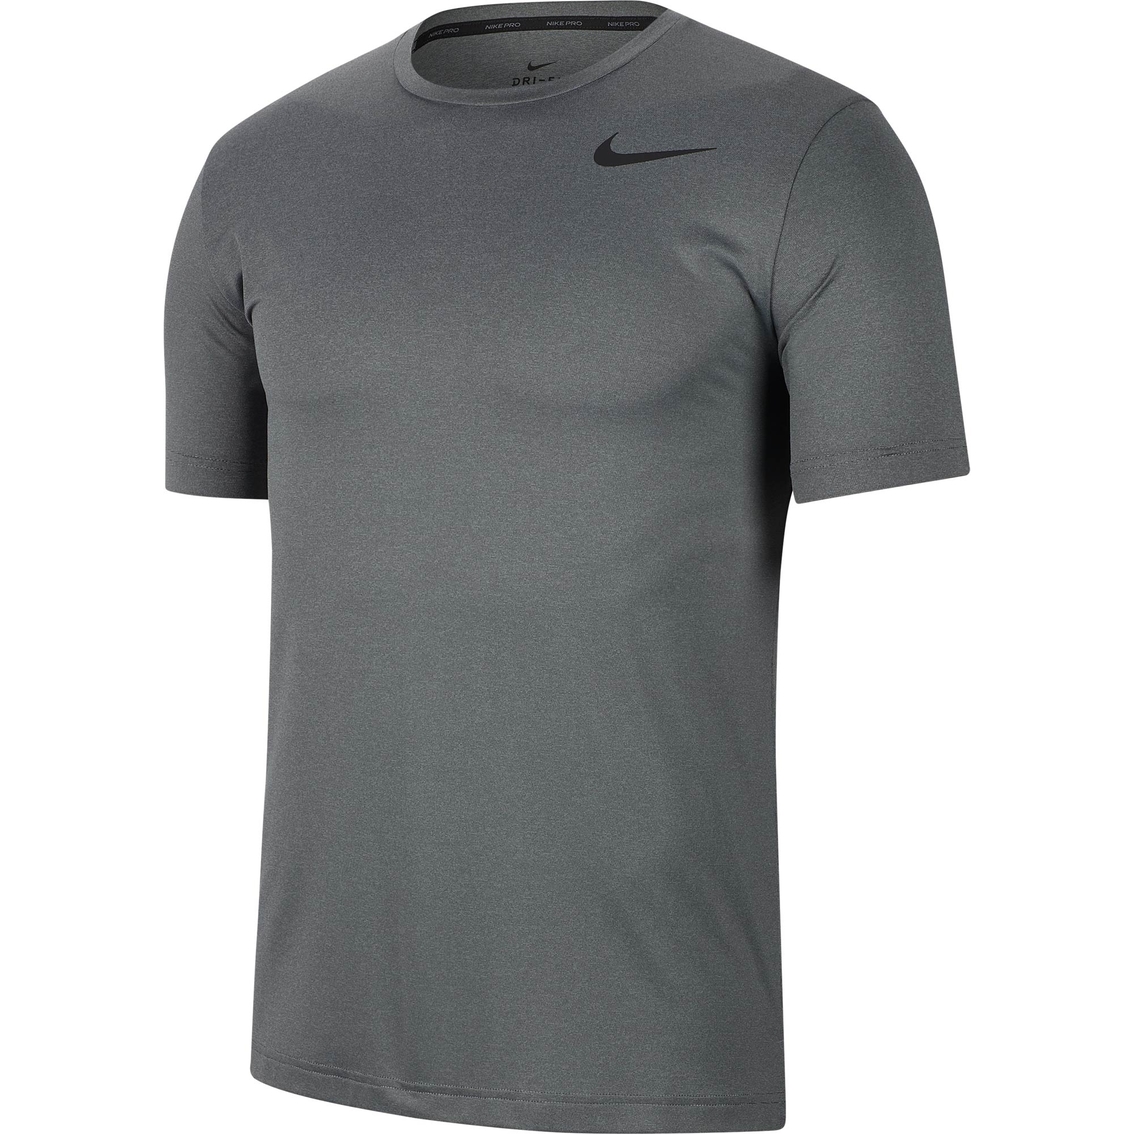 Nike Pro Hyper Dry Top | Shirts | Clothing & Accessories | Shop The ...